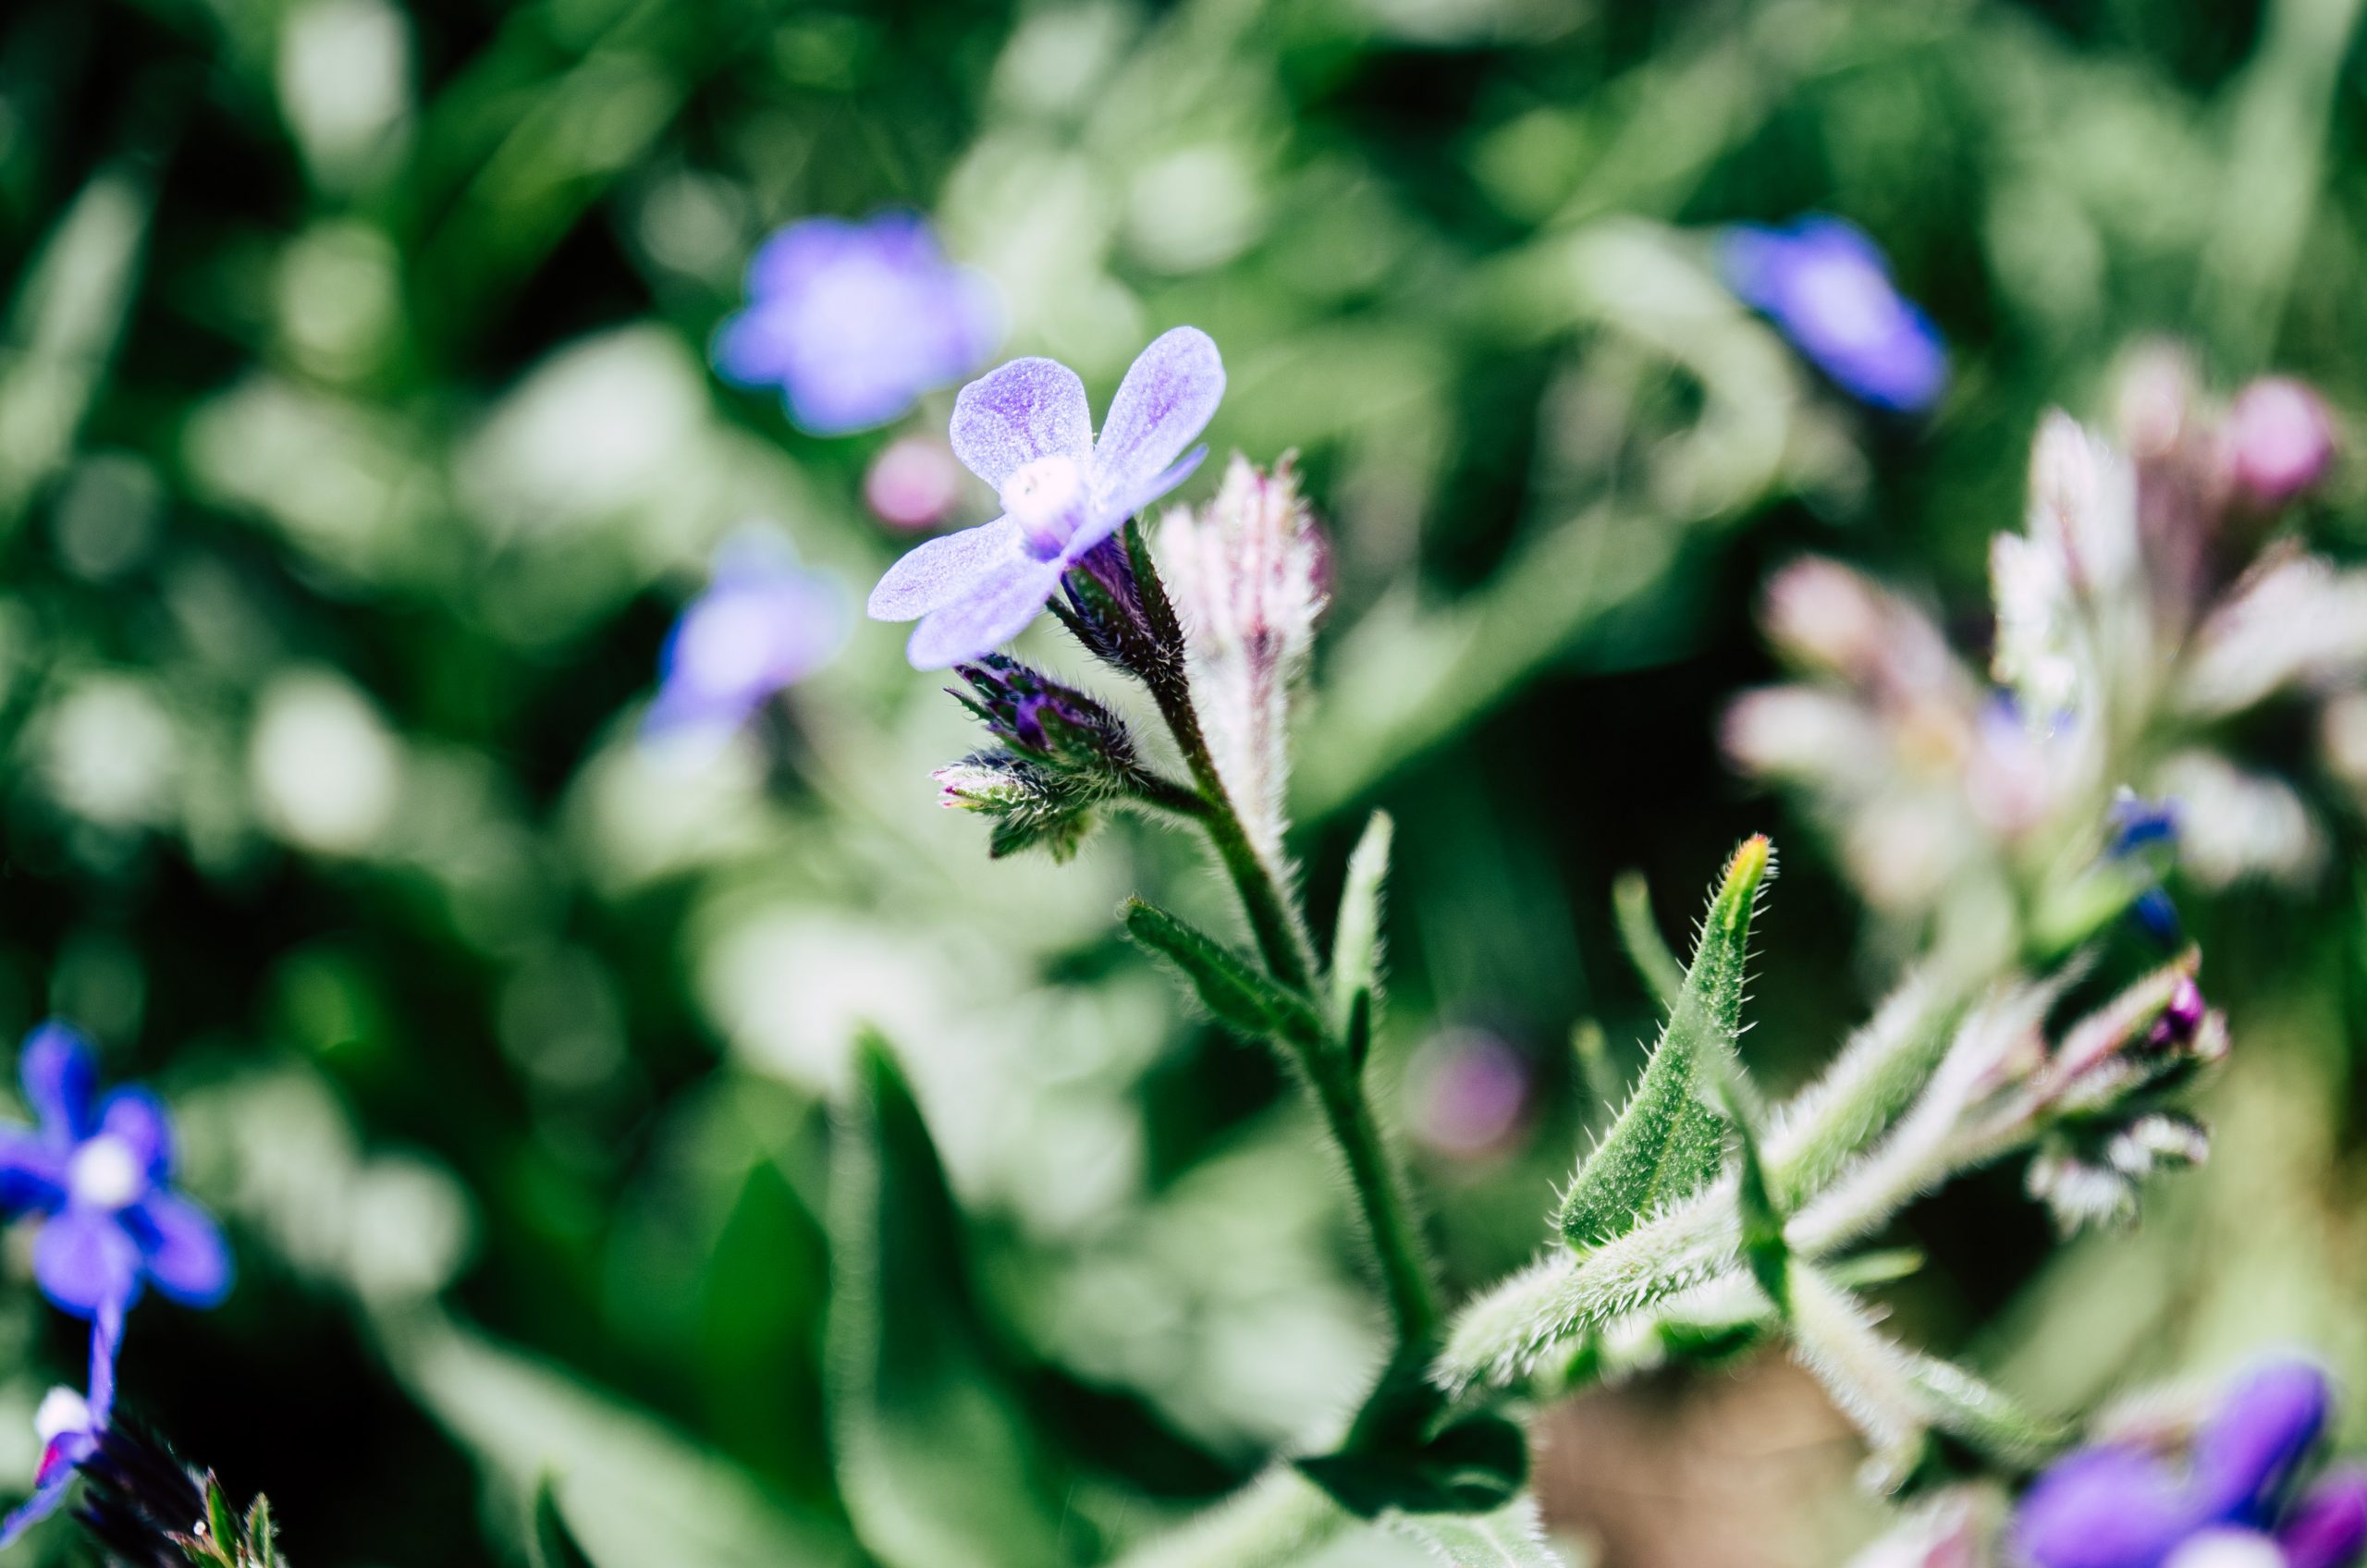 A close-up photograph of a plant with tiny purple flowers and green stems.